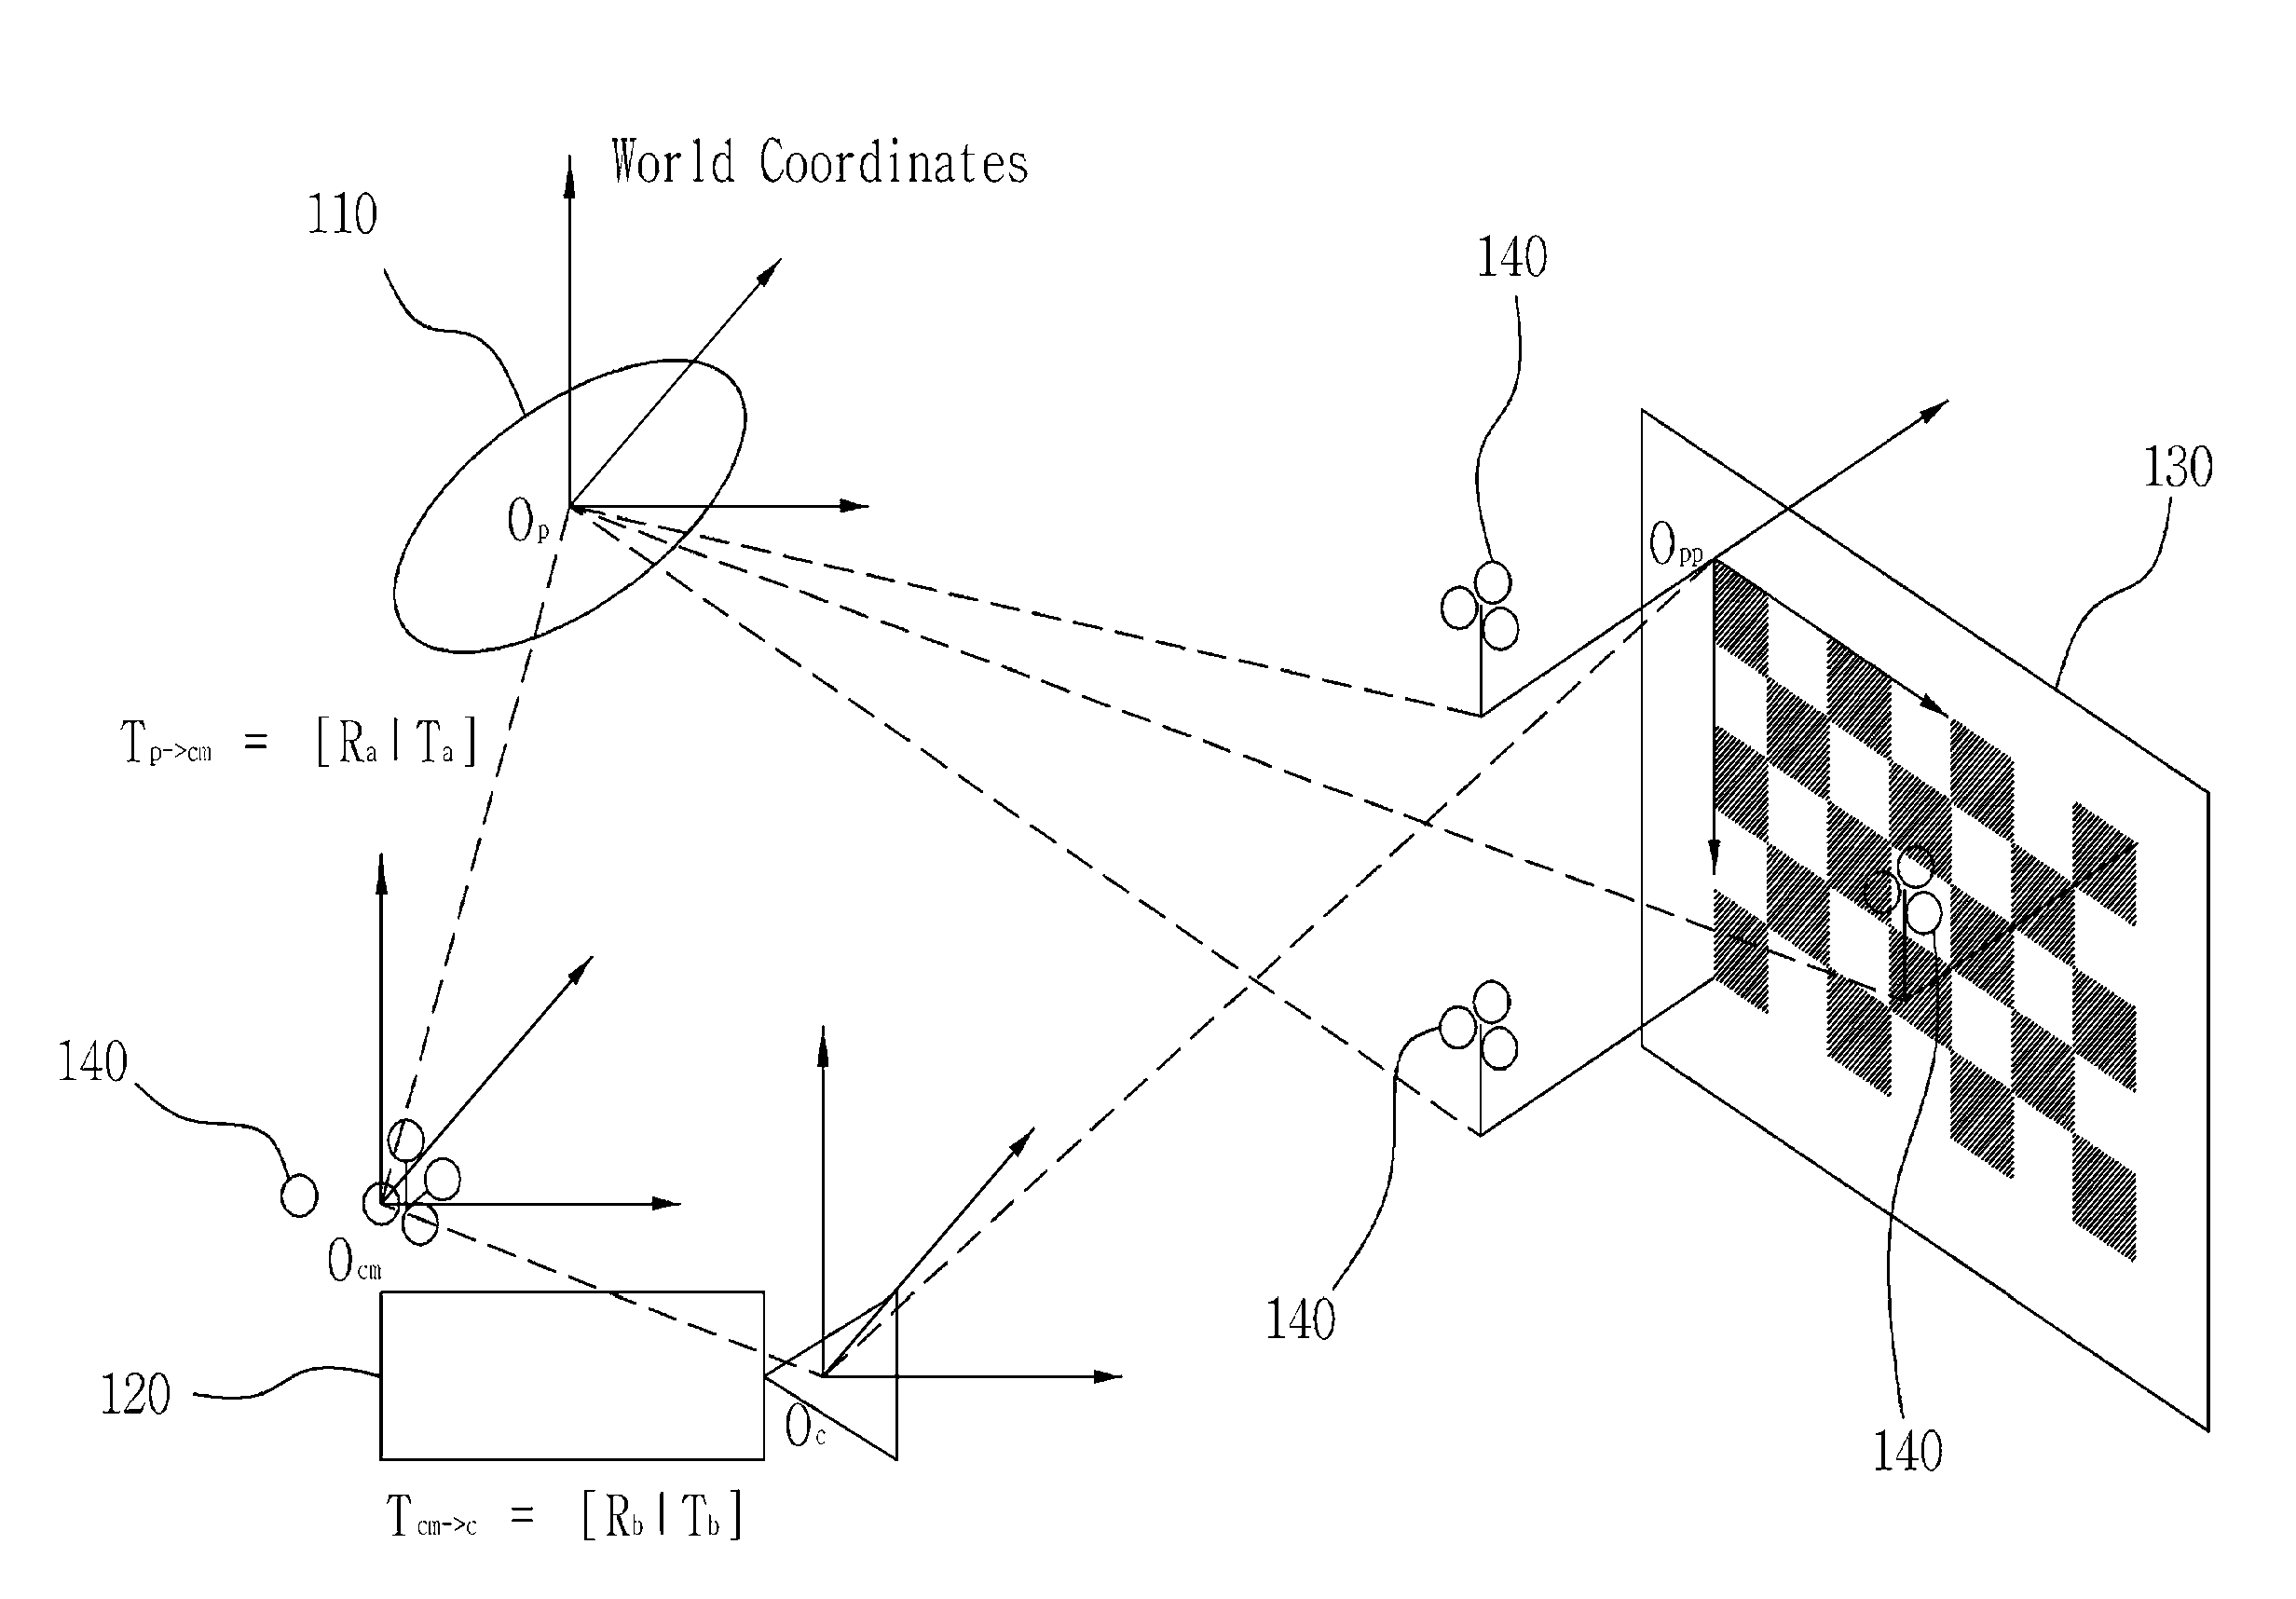 Method of registrating a camera of a surgical navigation system for an augmented reality